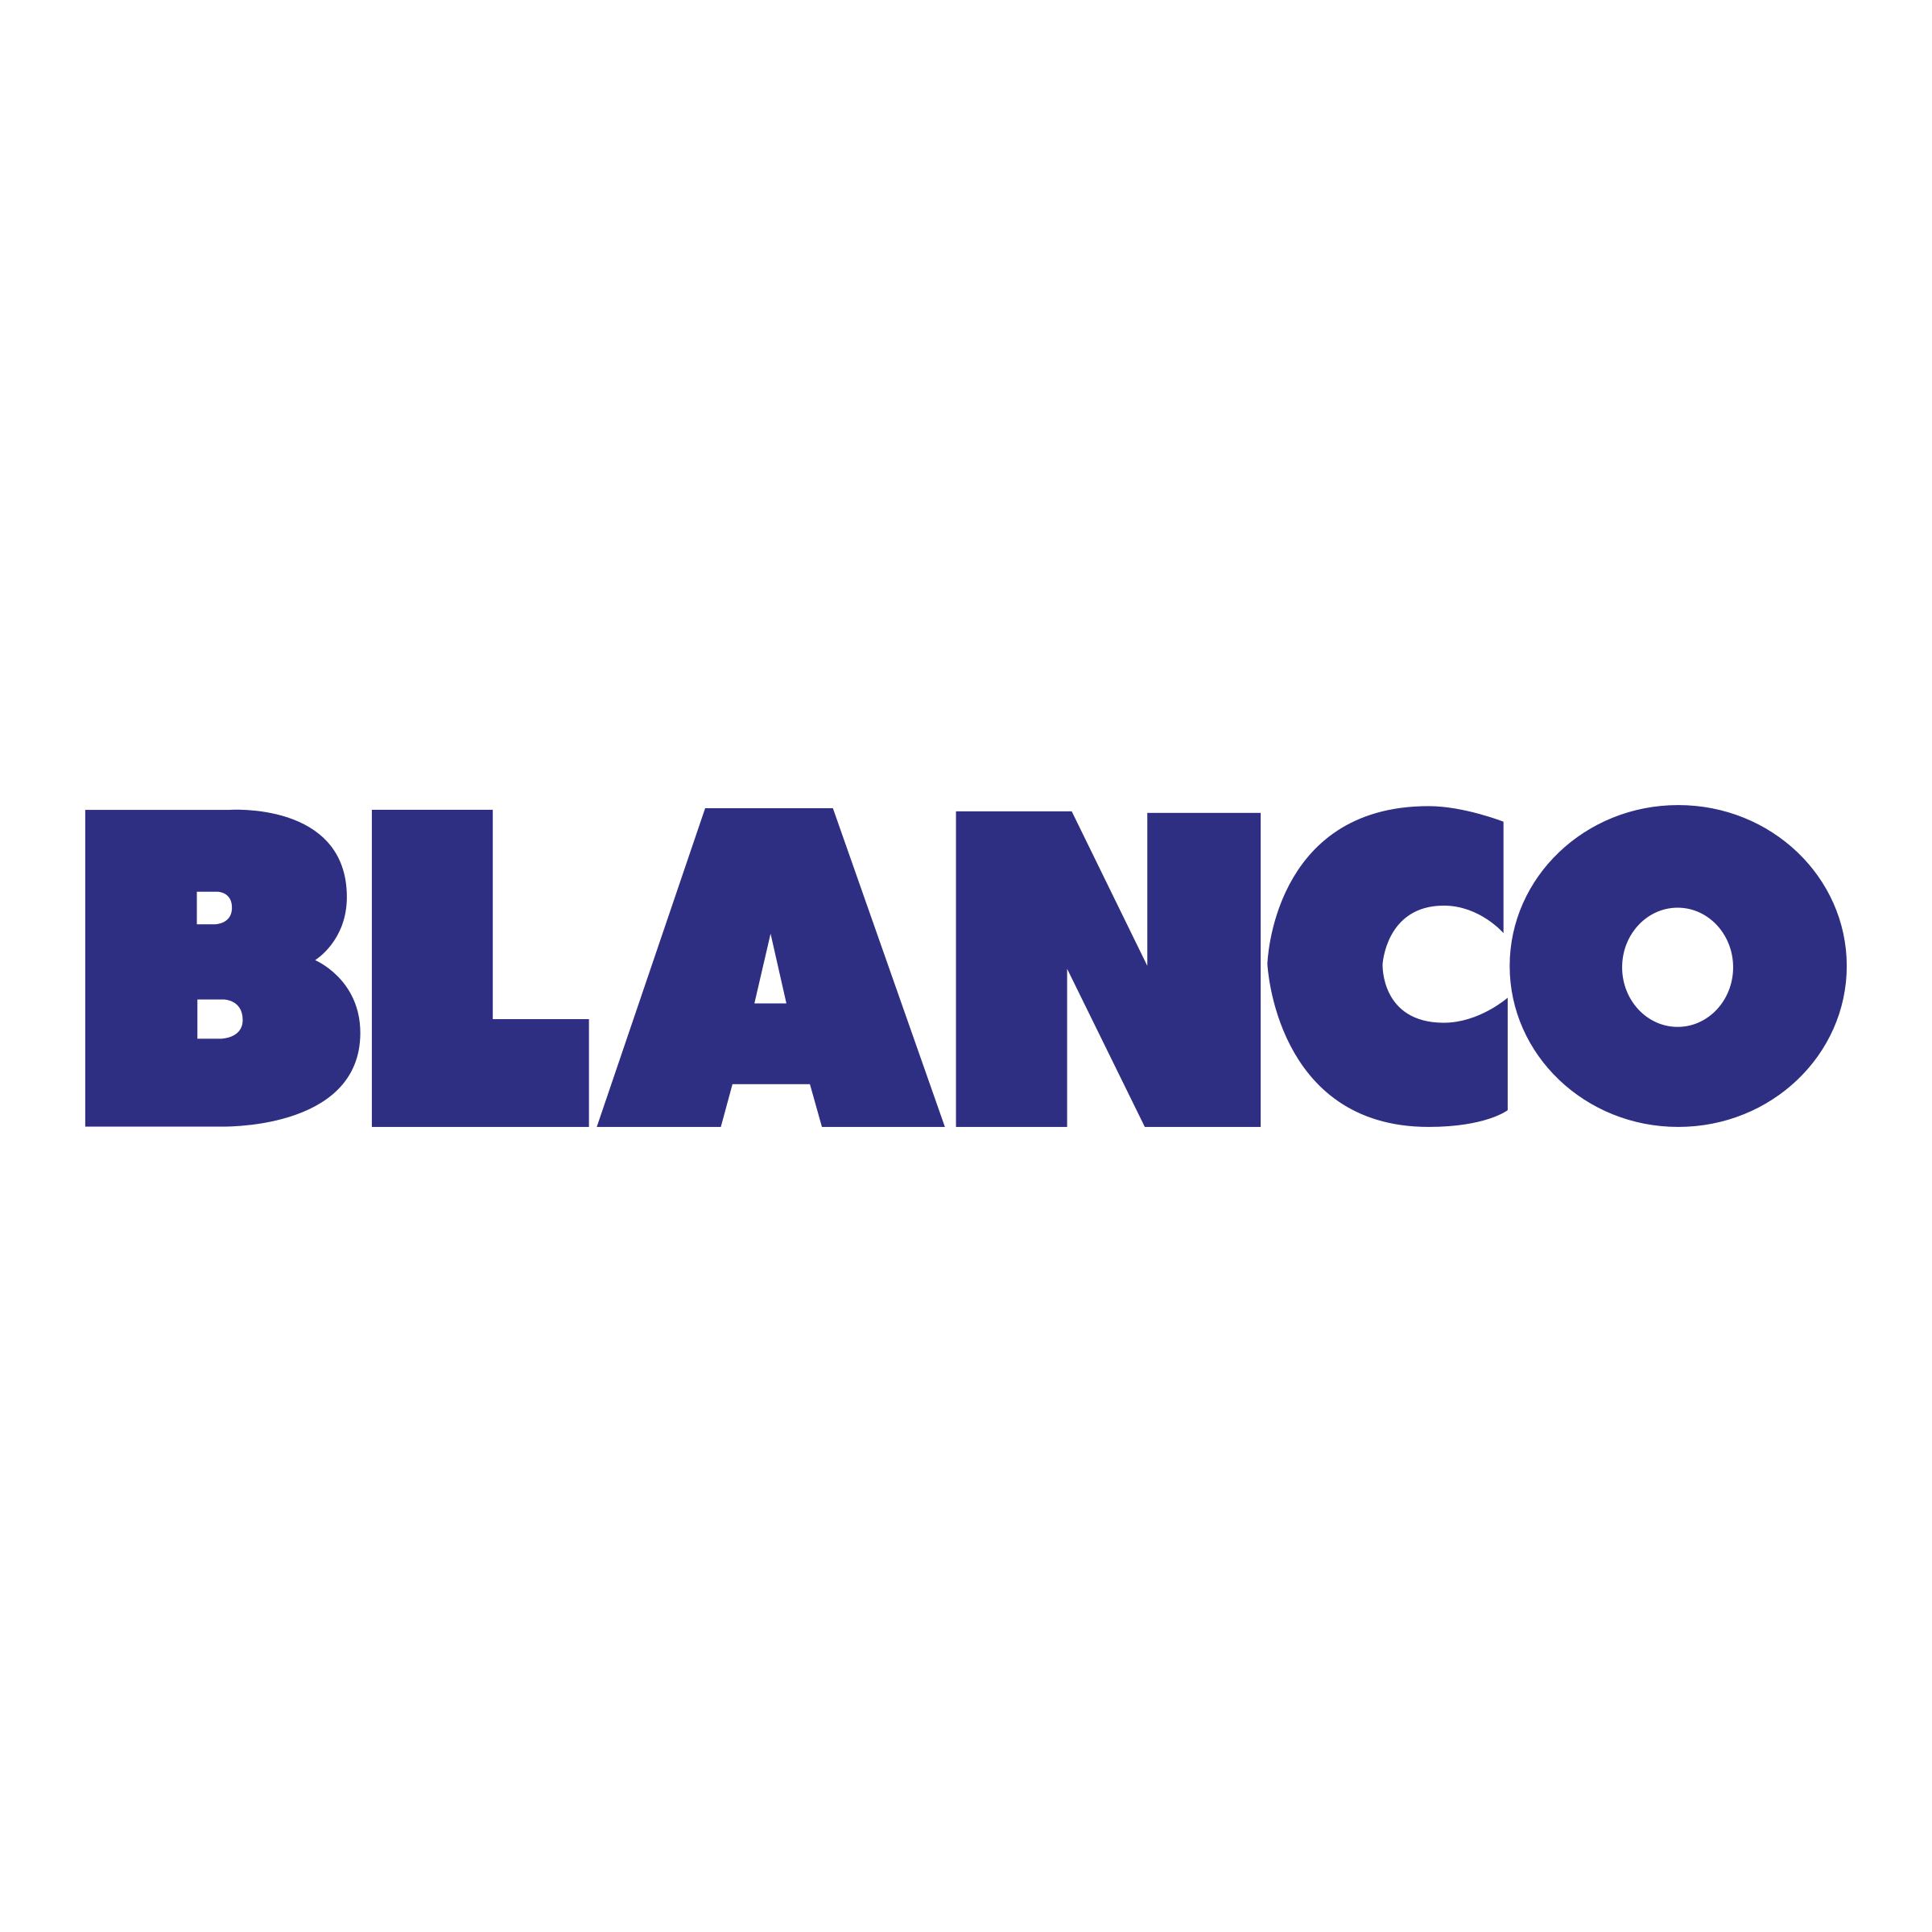 Bespoke Designs - blanco logo png transparent - kitchen renovation,cabinetry,custom cabinetry,built in cupboard